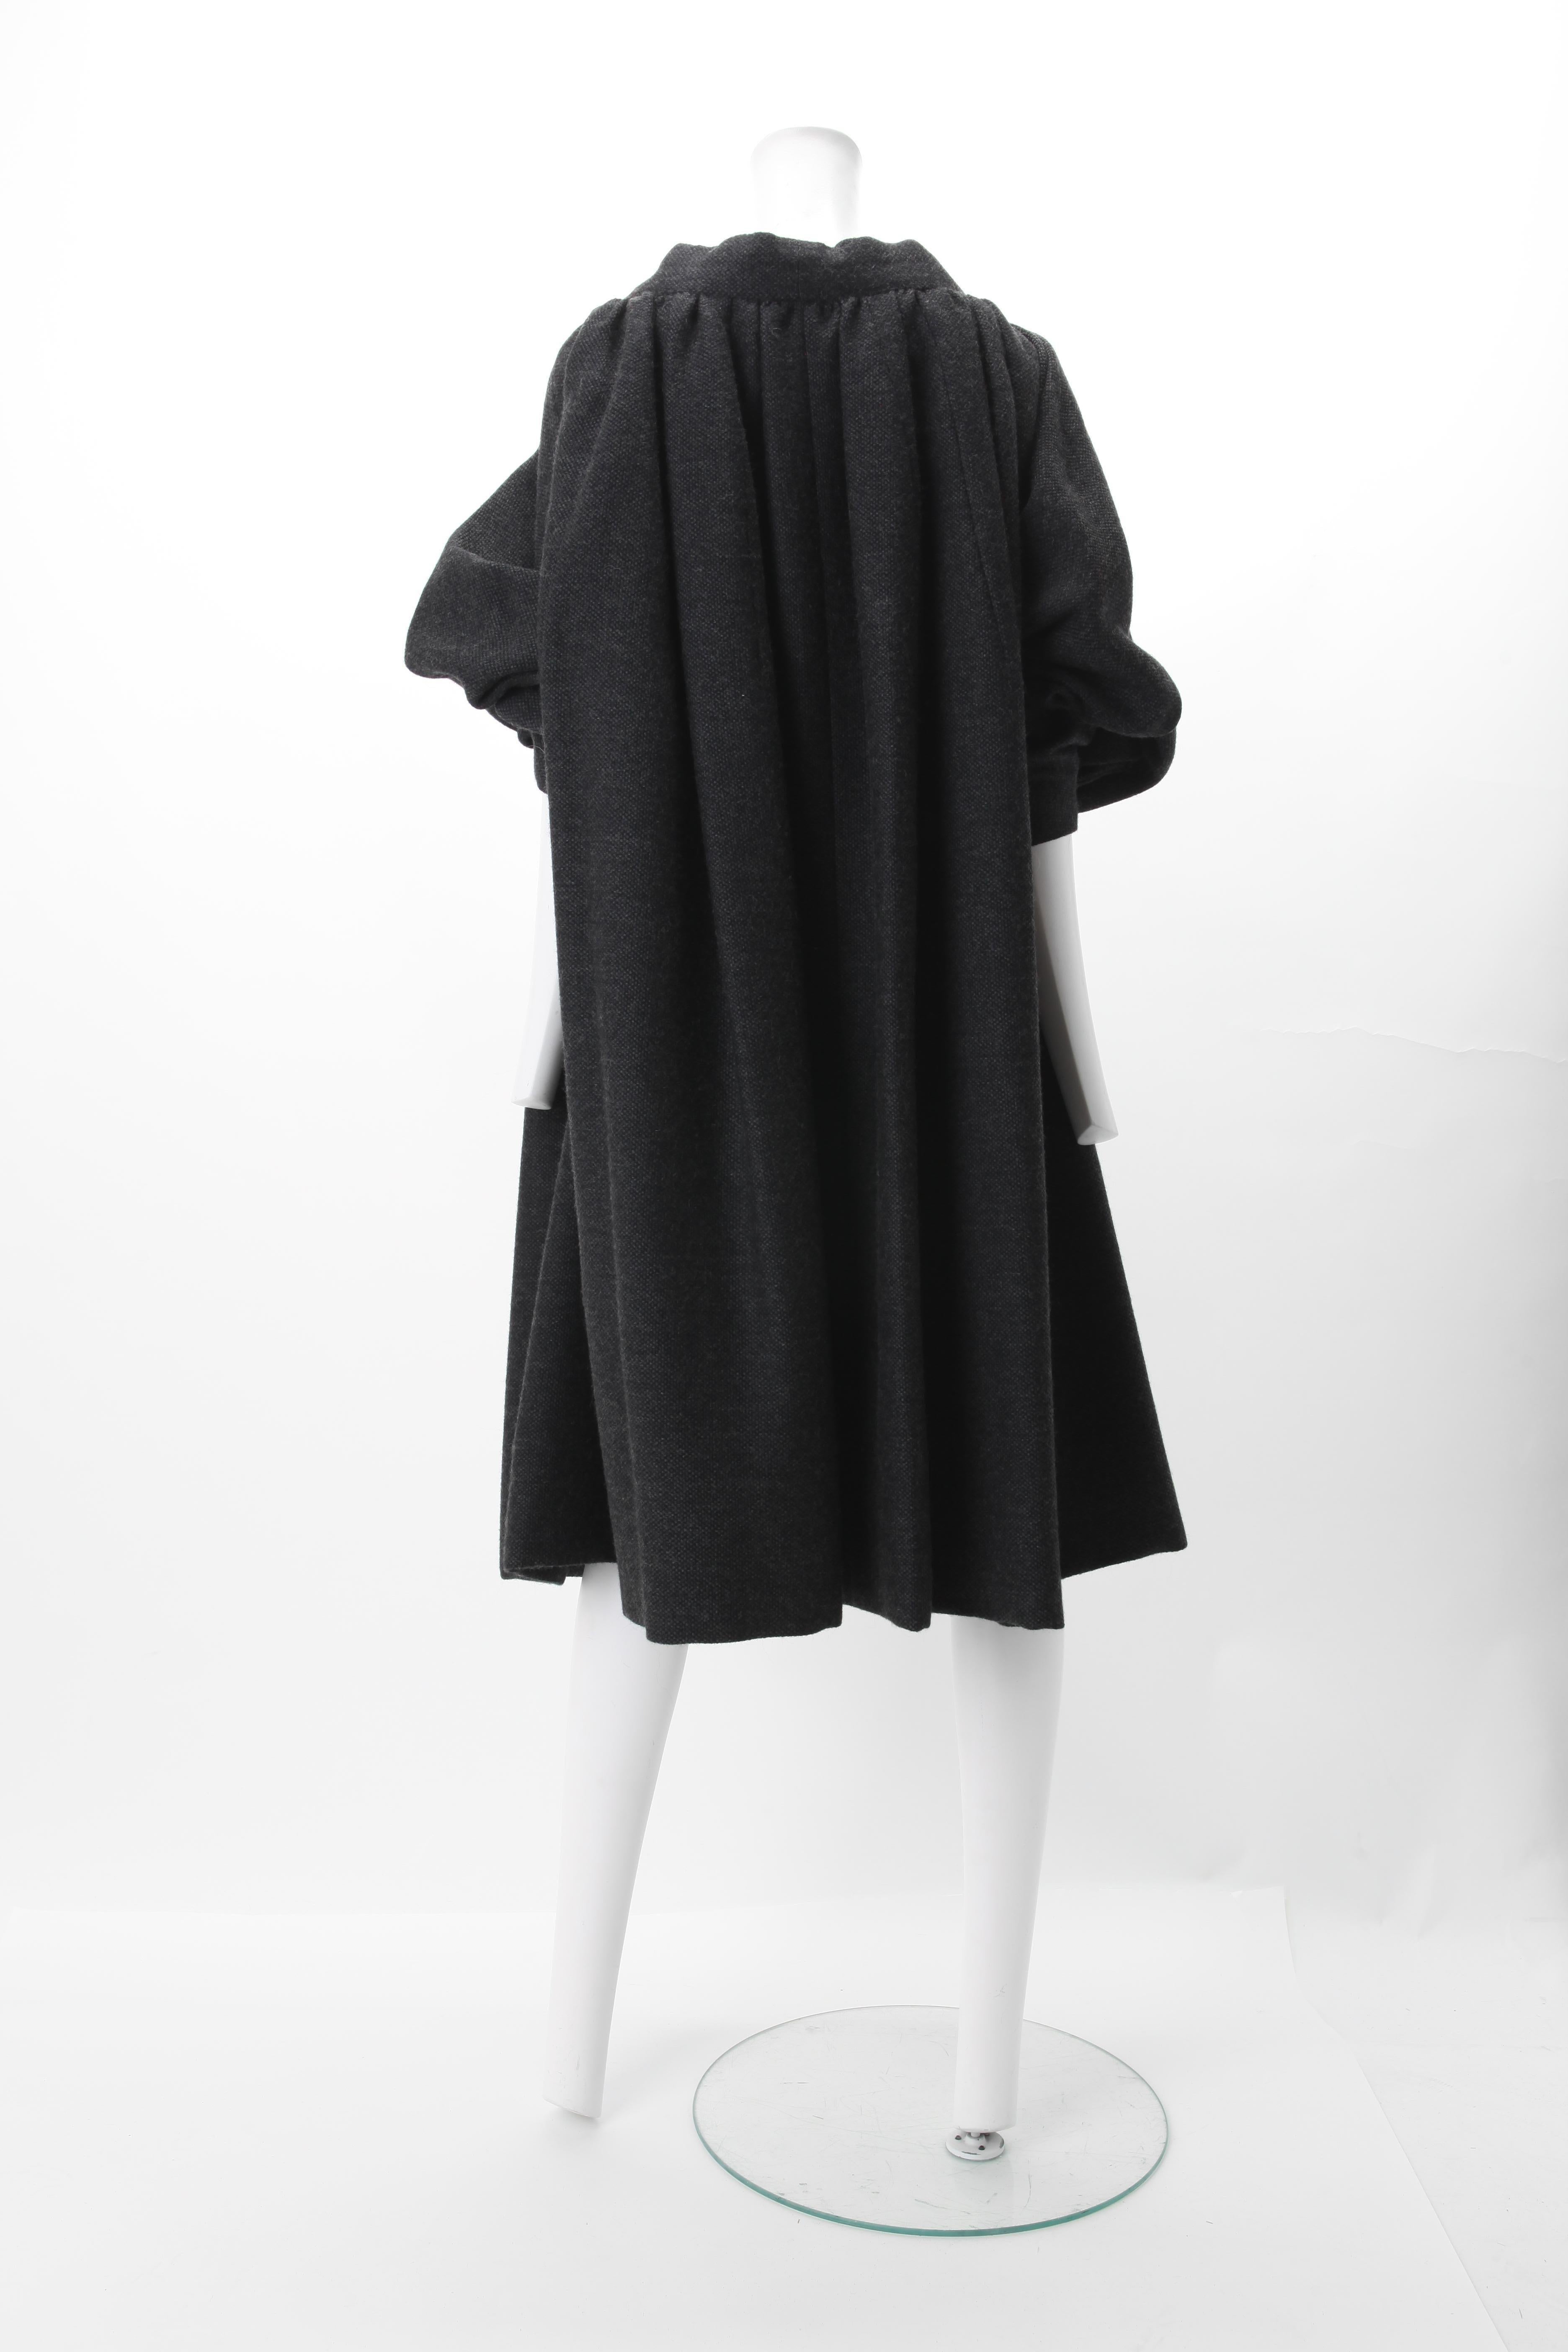 Nina Ricci Grey Wool Knit Cocoon Coat, c.1970s
1970s Nina Ricci Grey Cocoon Coat featuring boat neckline collar and tapered Raglan sleeves.
Three wooden button closure at center front.
Black Silk line Interior. 
Size: One Size